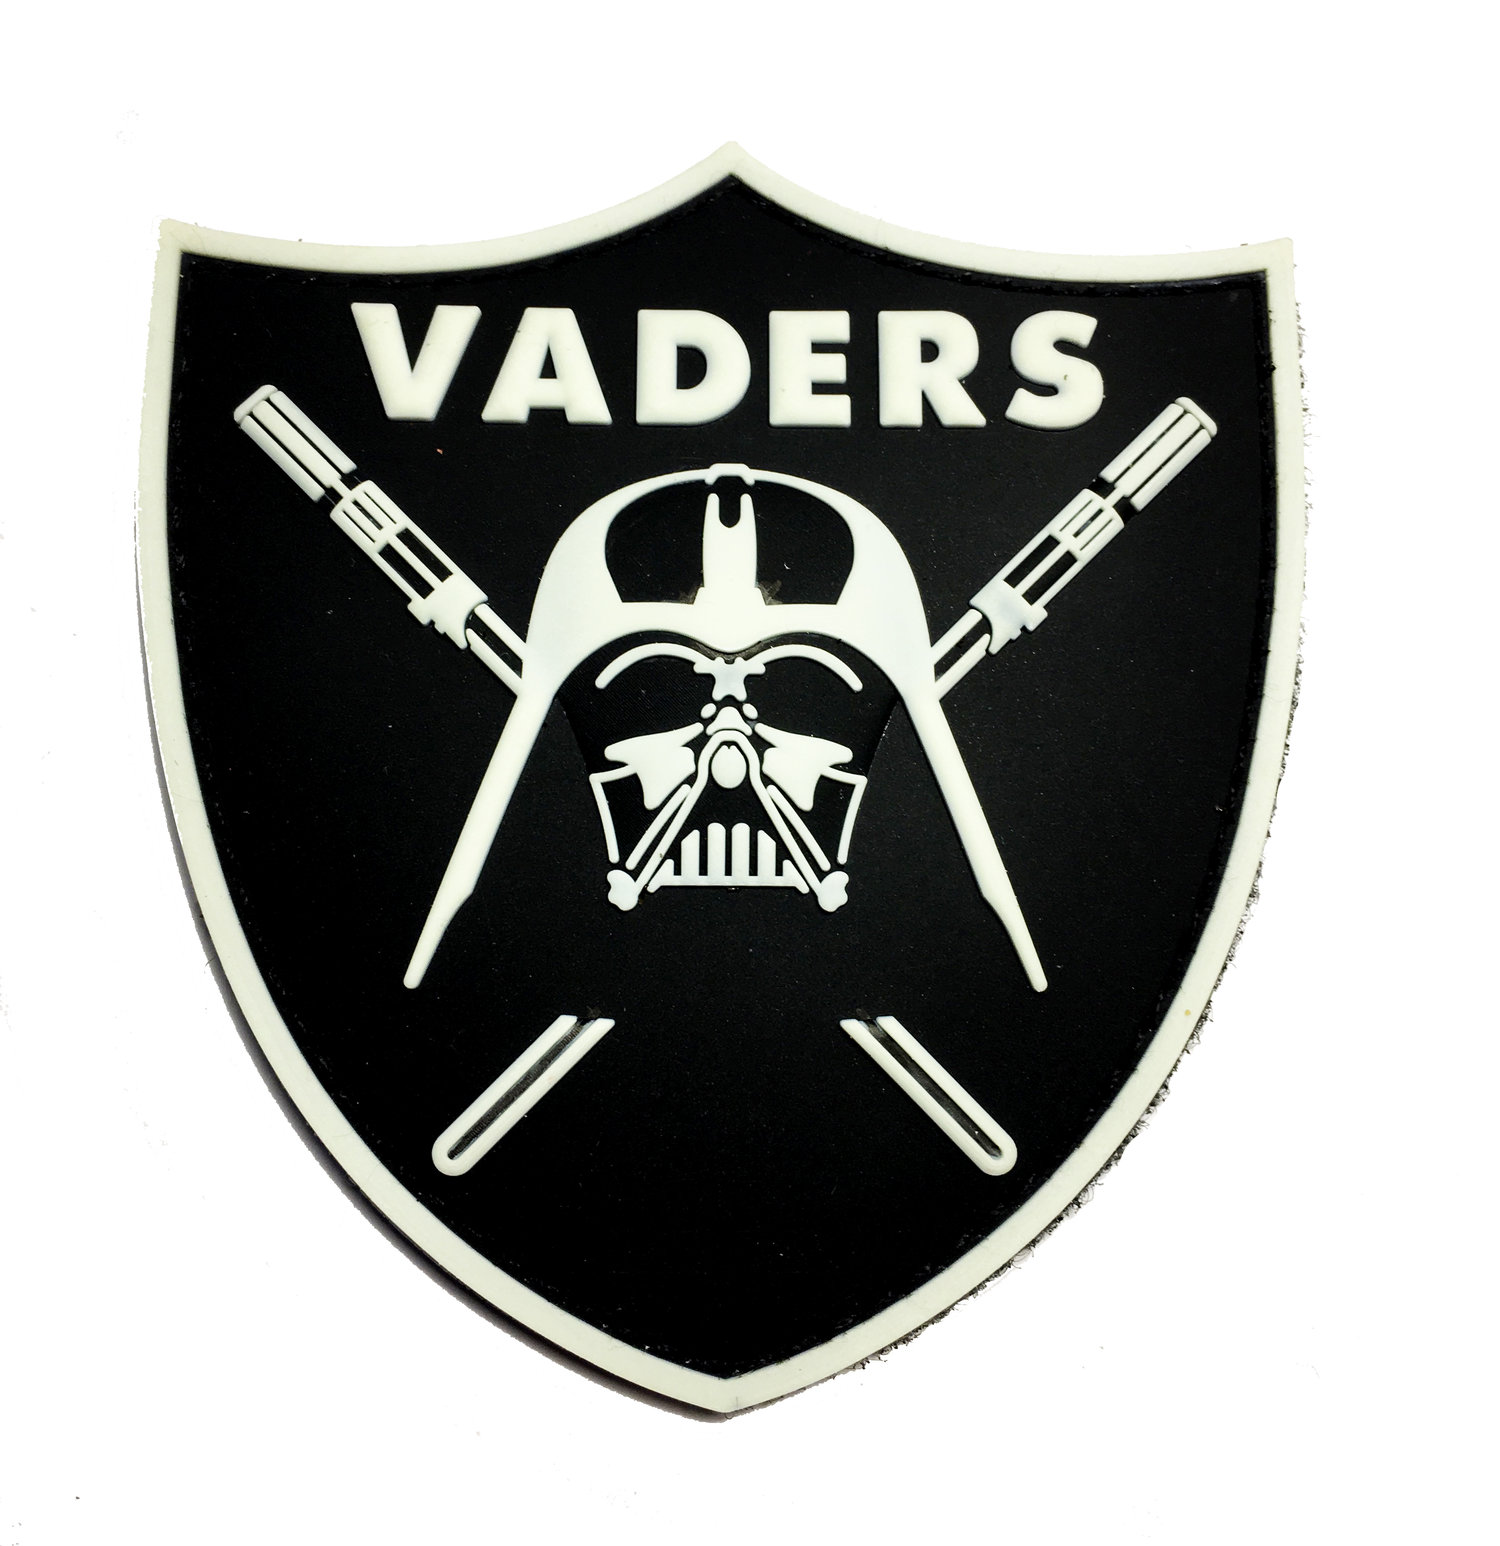 SWPA-SB-01 STAR WARS Darth Vader Coffee Embroidered 3" Green Patch-USA Mailed